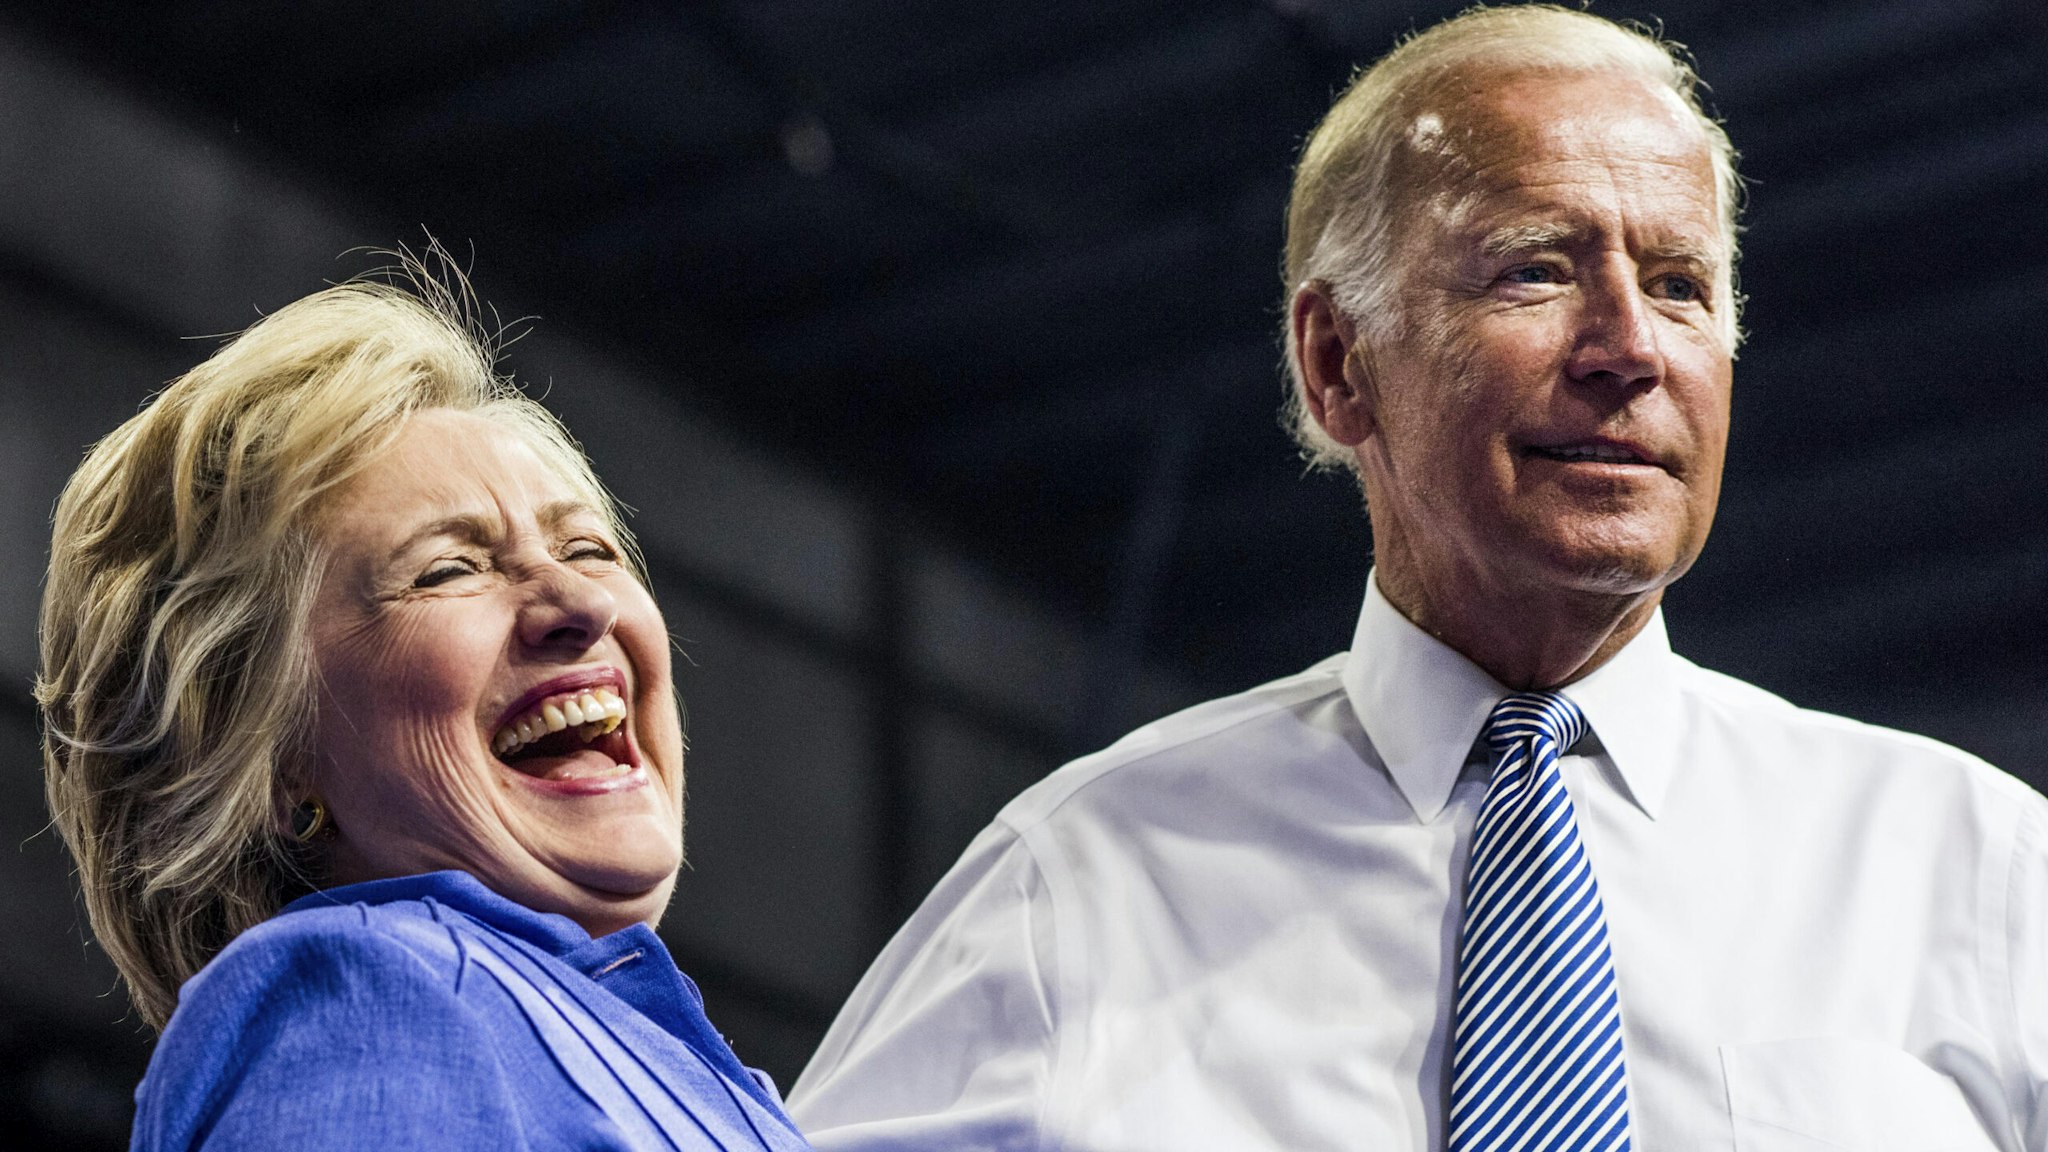 Democratic Nominee for President of the United States former Secretary of State Hillary Clinton rallies with longtime friend and colleague Vice President Joe Biden with Pennsylvania voters in Scranton, Pennsylvania on Monday August 15, 2016.